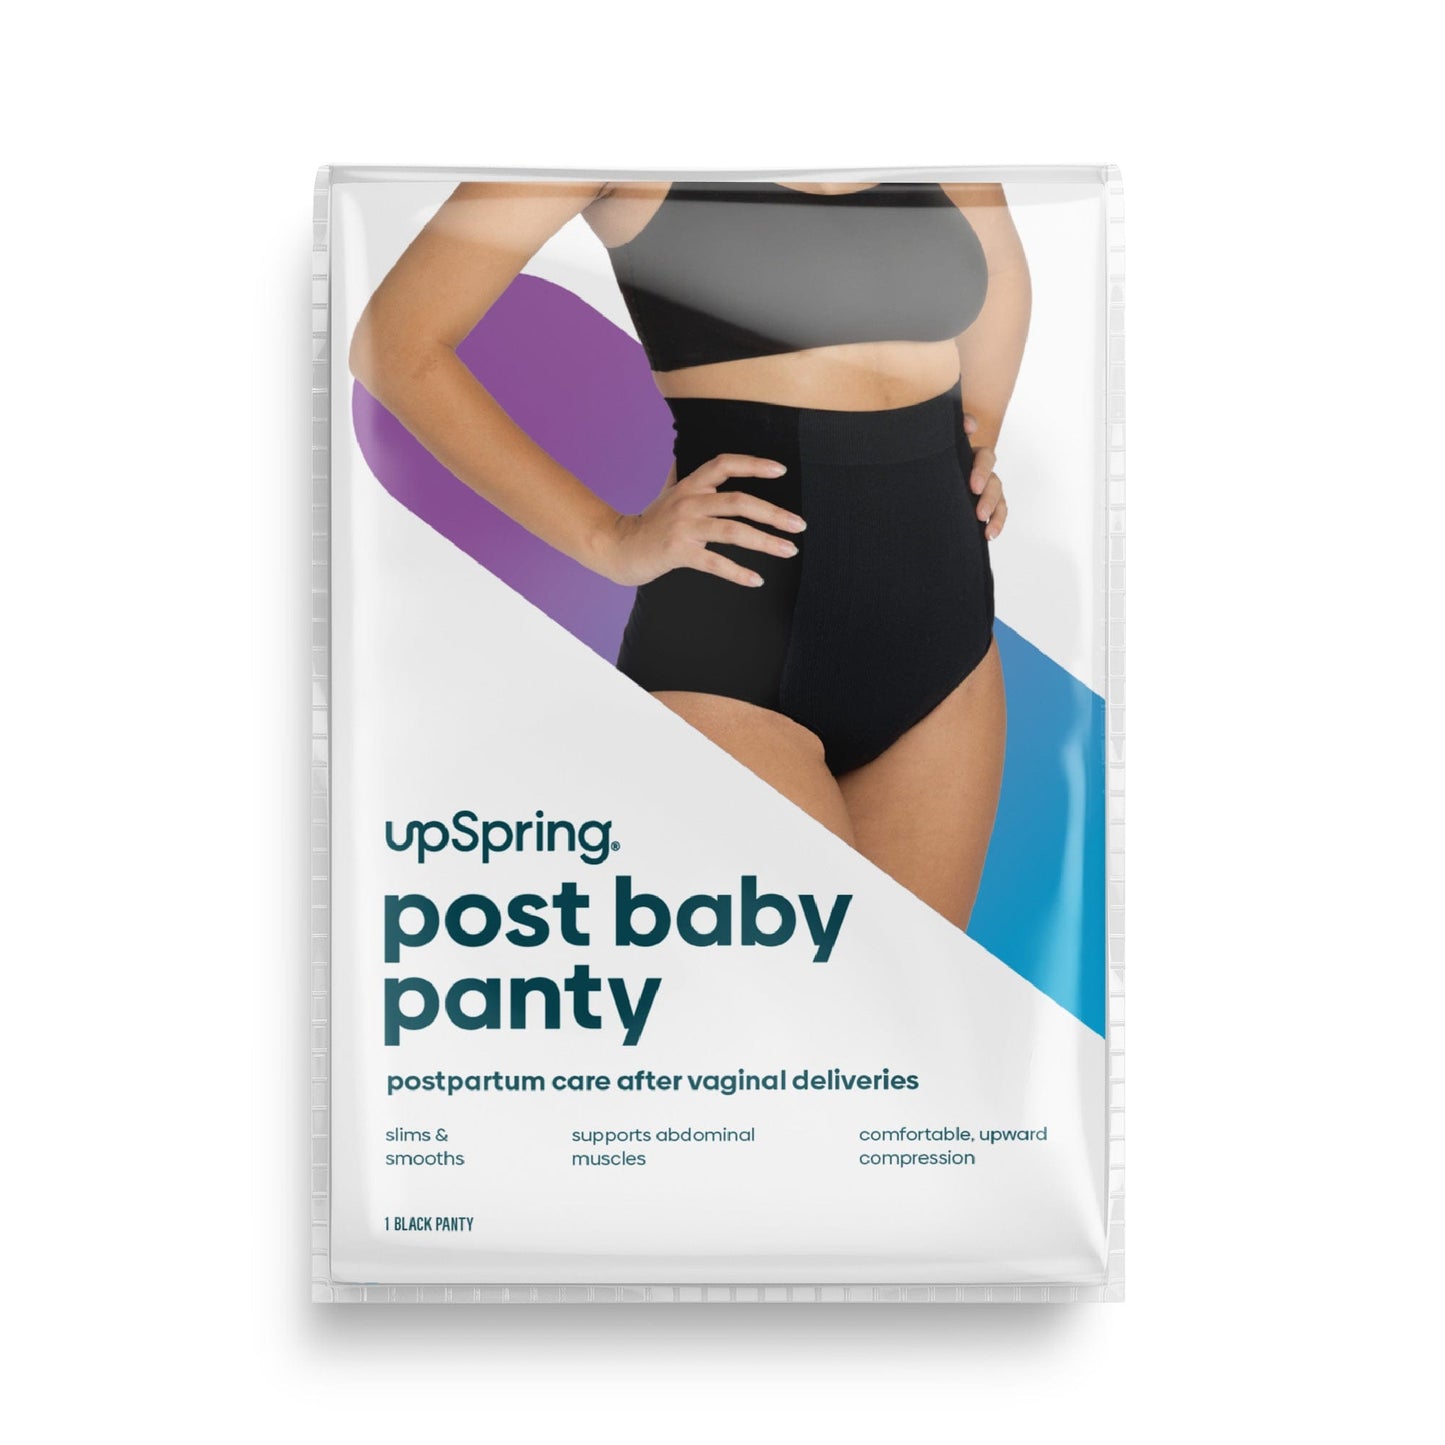 UpSpring post baby panty product in black color